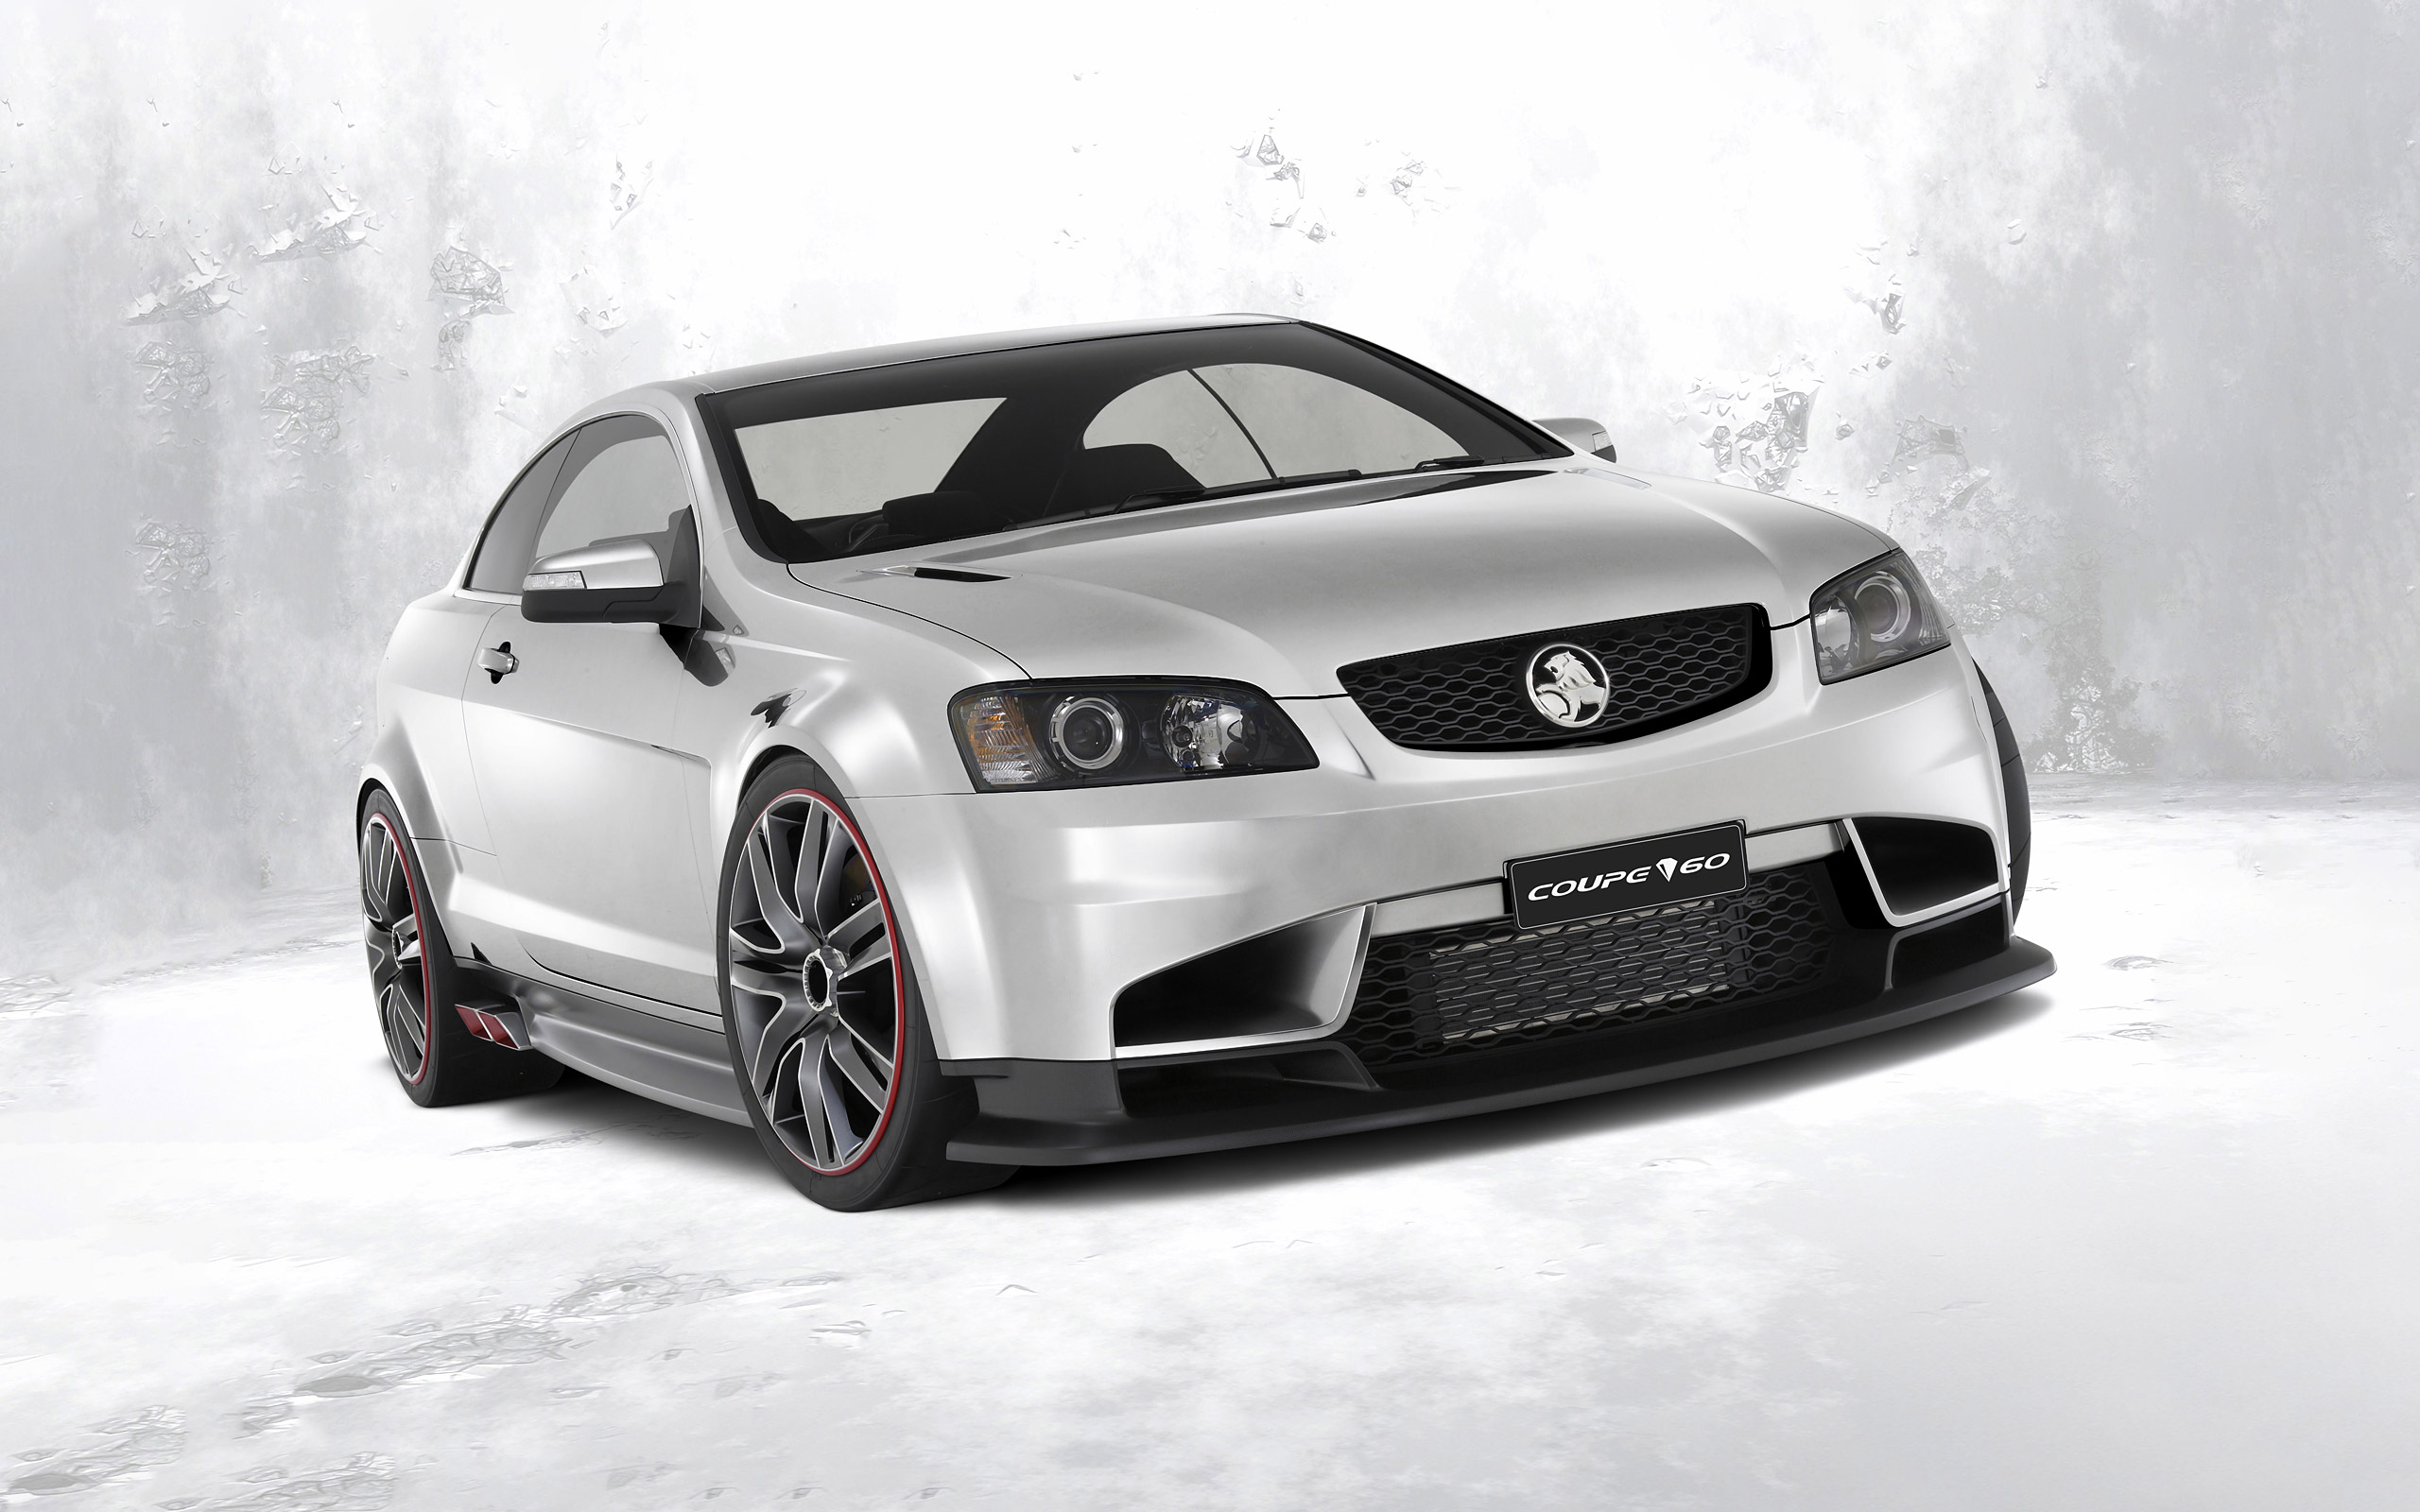  2008 Holden Coupe 60 Concept Wallpaper.